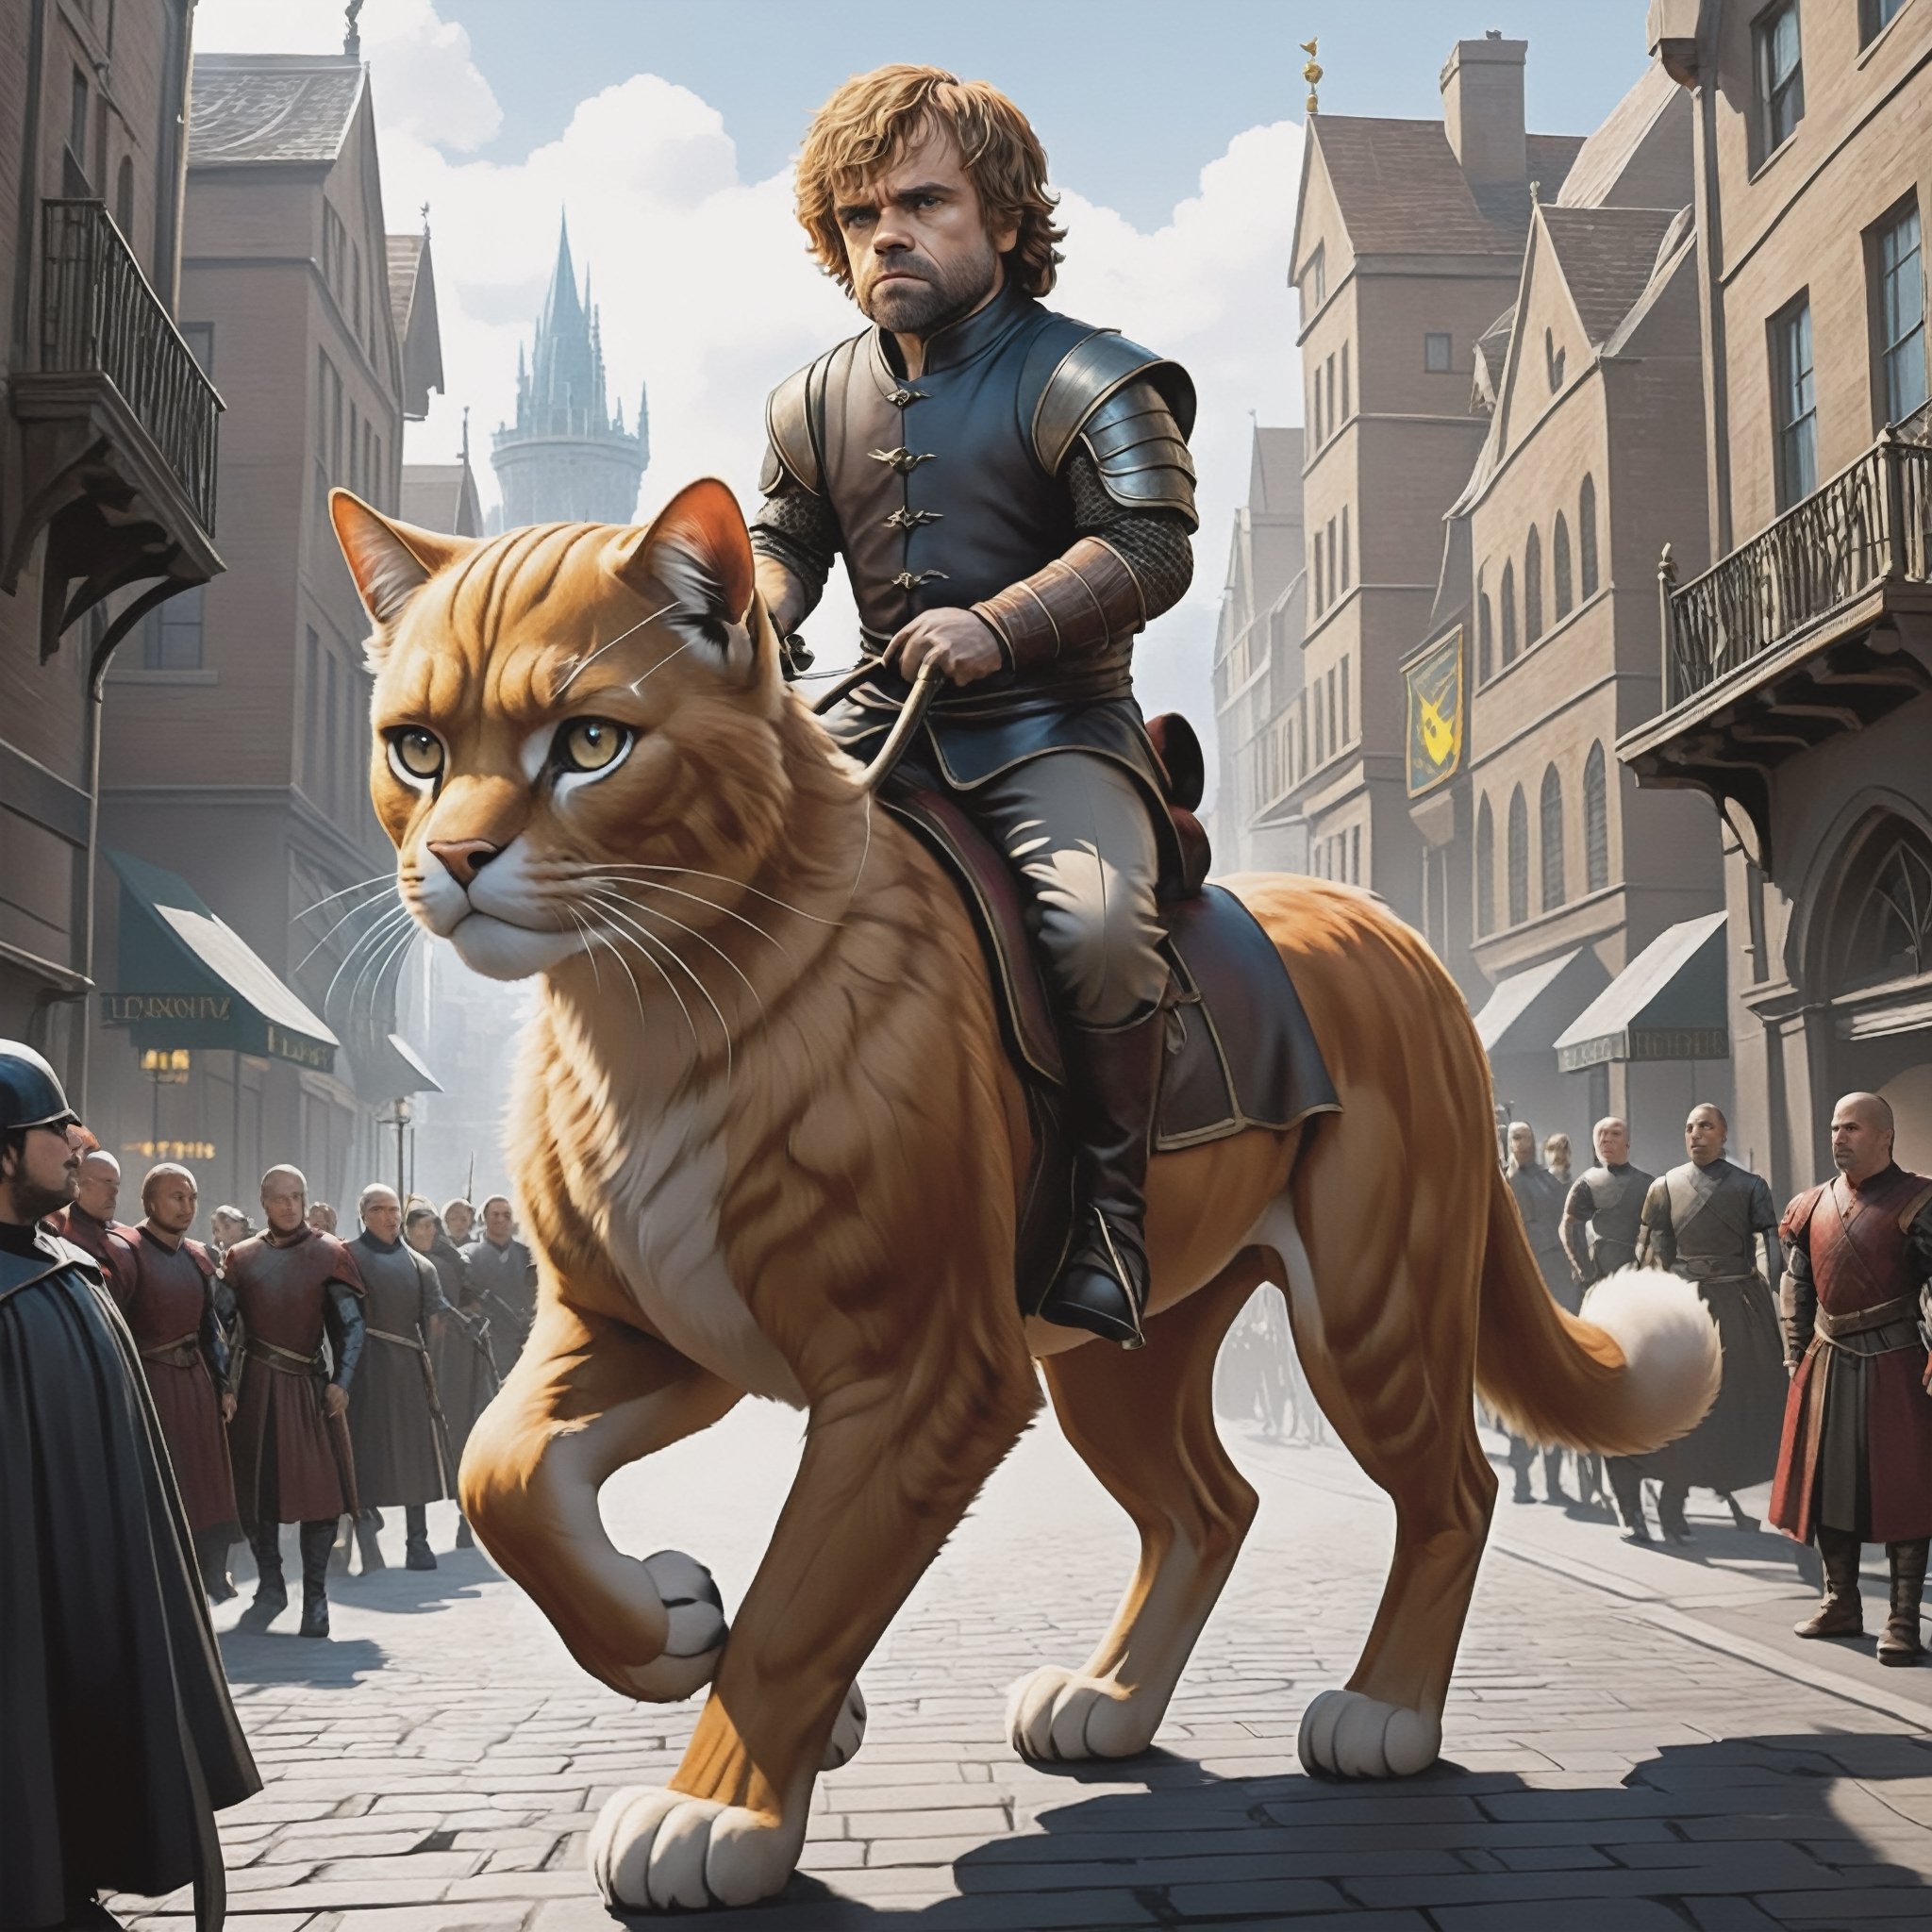 Tyrion Lannister from game of thrones is riding a giant cat through a city 